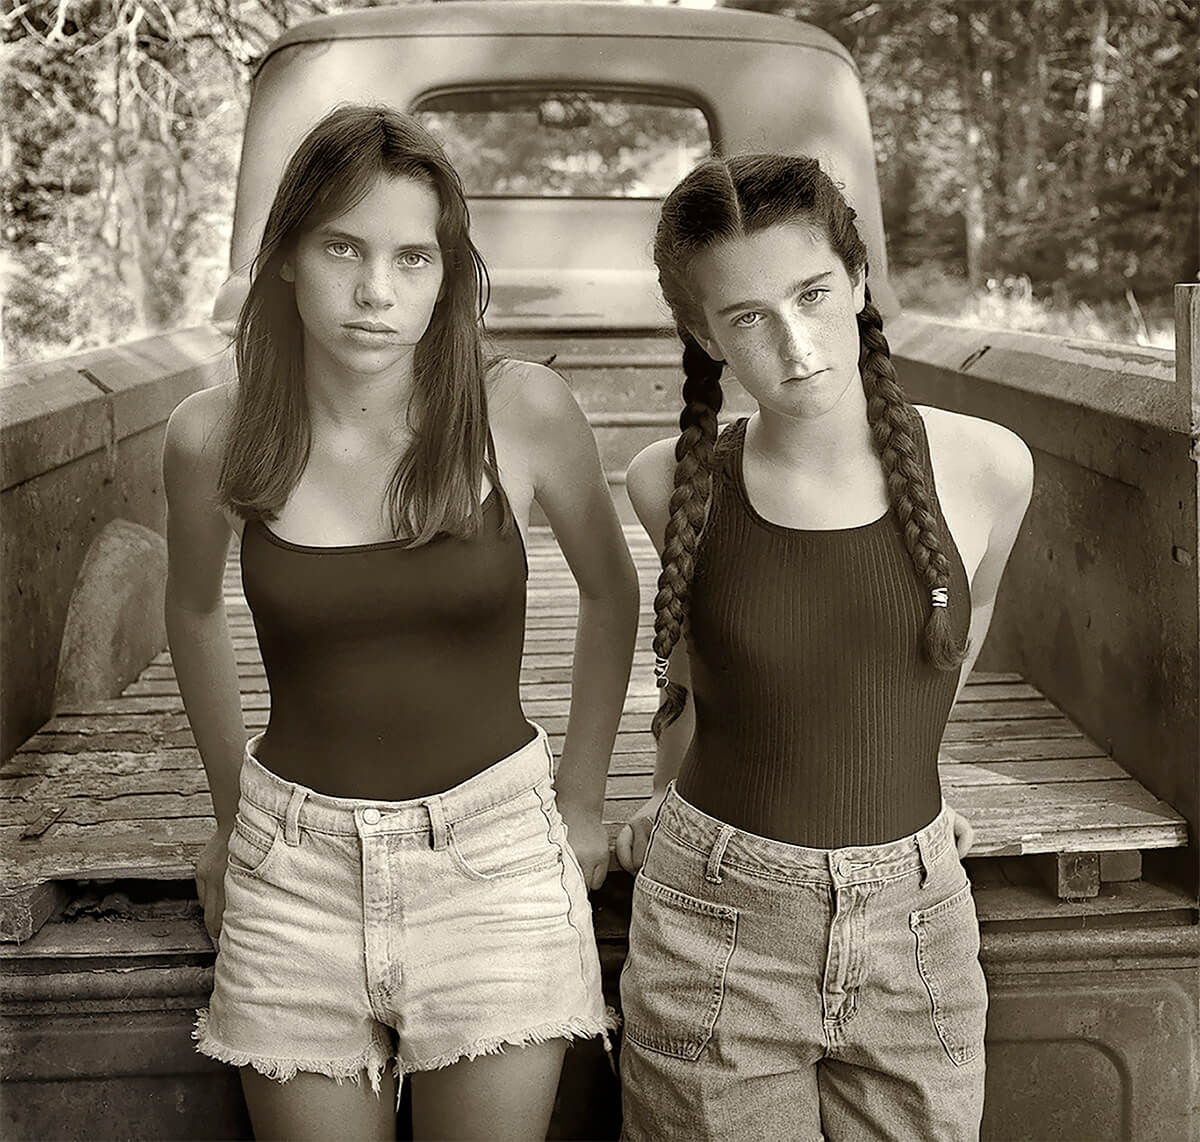 Two girls by the truck<p>© Jack Montgomery</p>